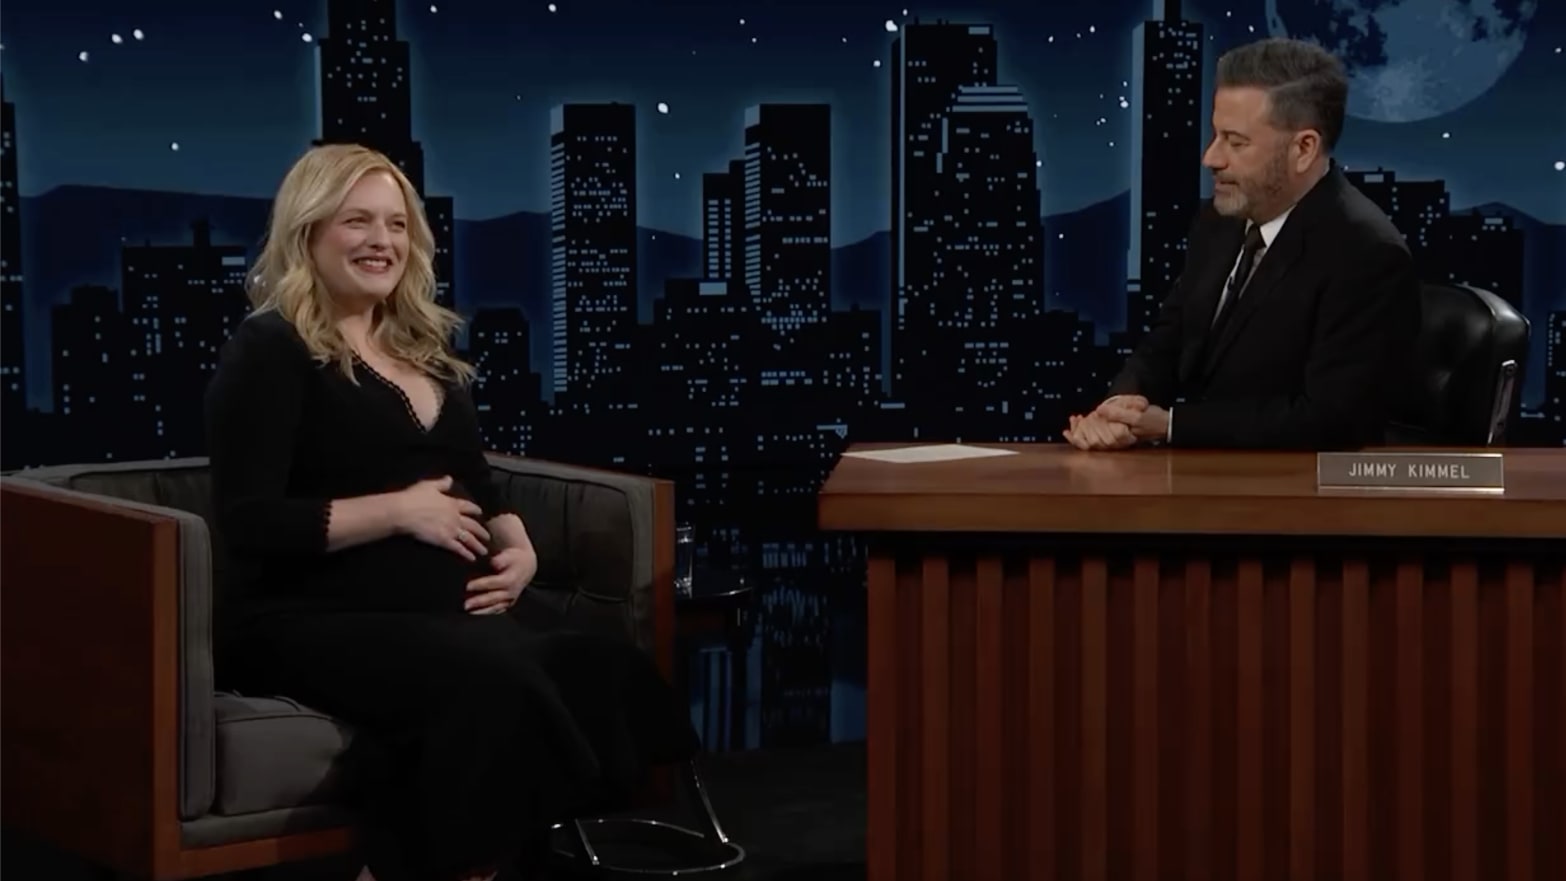 Elisabeth Moss confirmed she’s pregnant with her first child on ‘Jimmy Kimmel Live!’